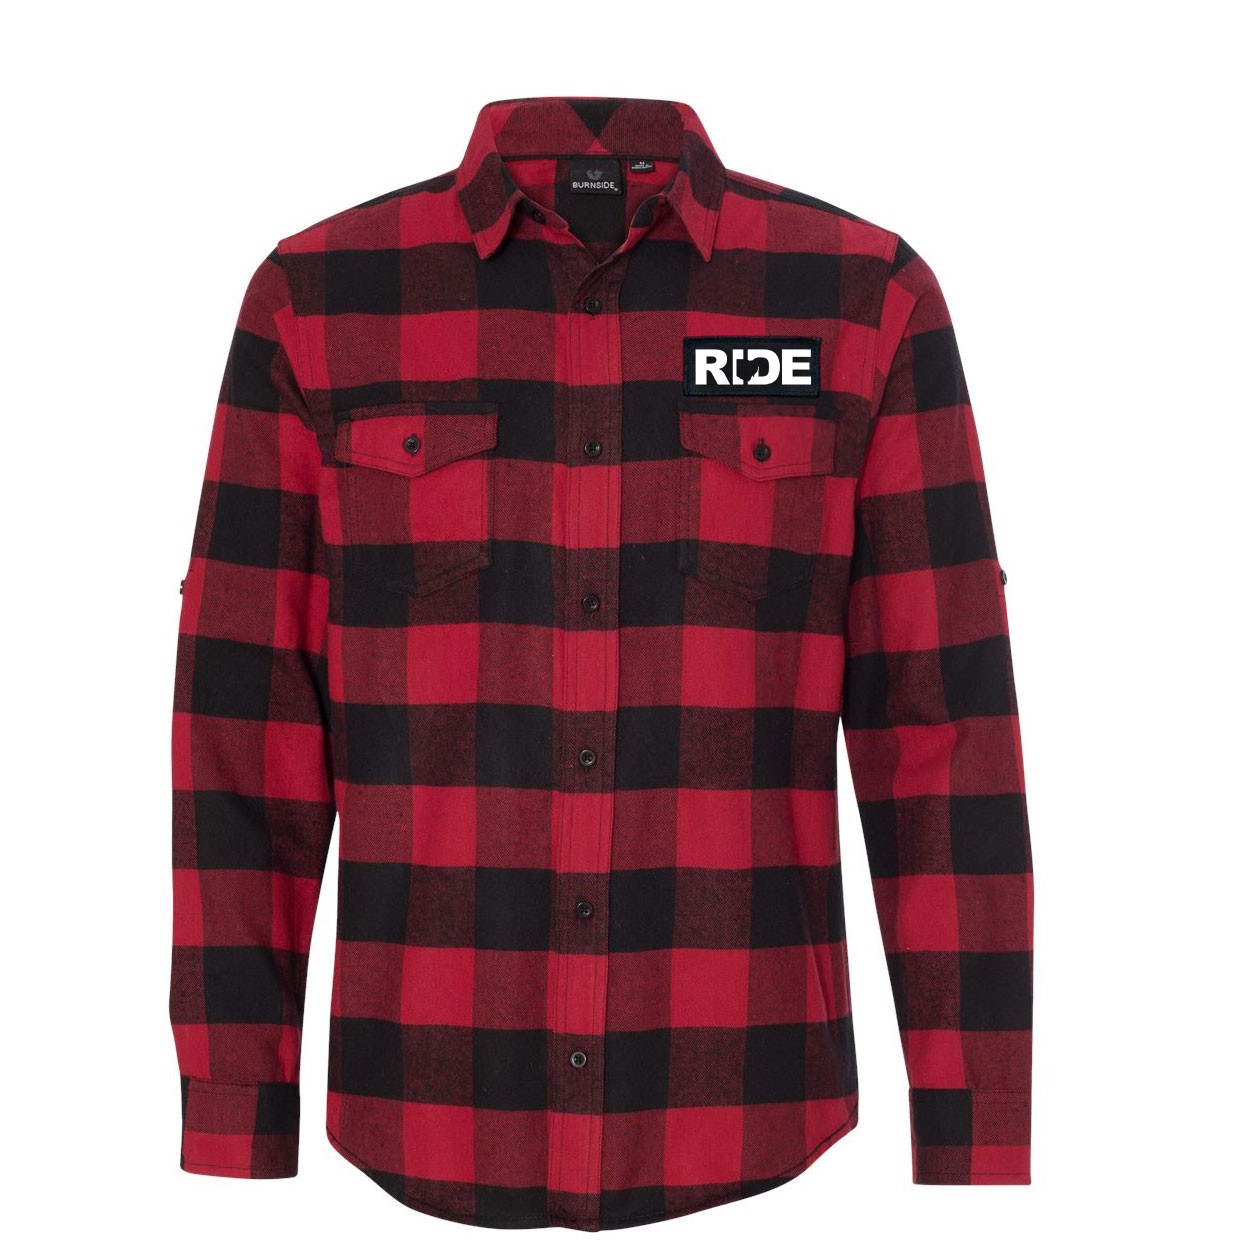 Ride Ohio Classic Unisex Long Sleeve Woven Patch Flannel Shirt Red/Black Buffalo (White Logo)